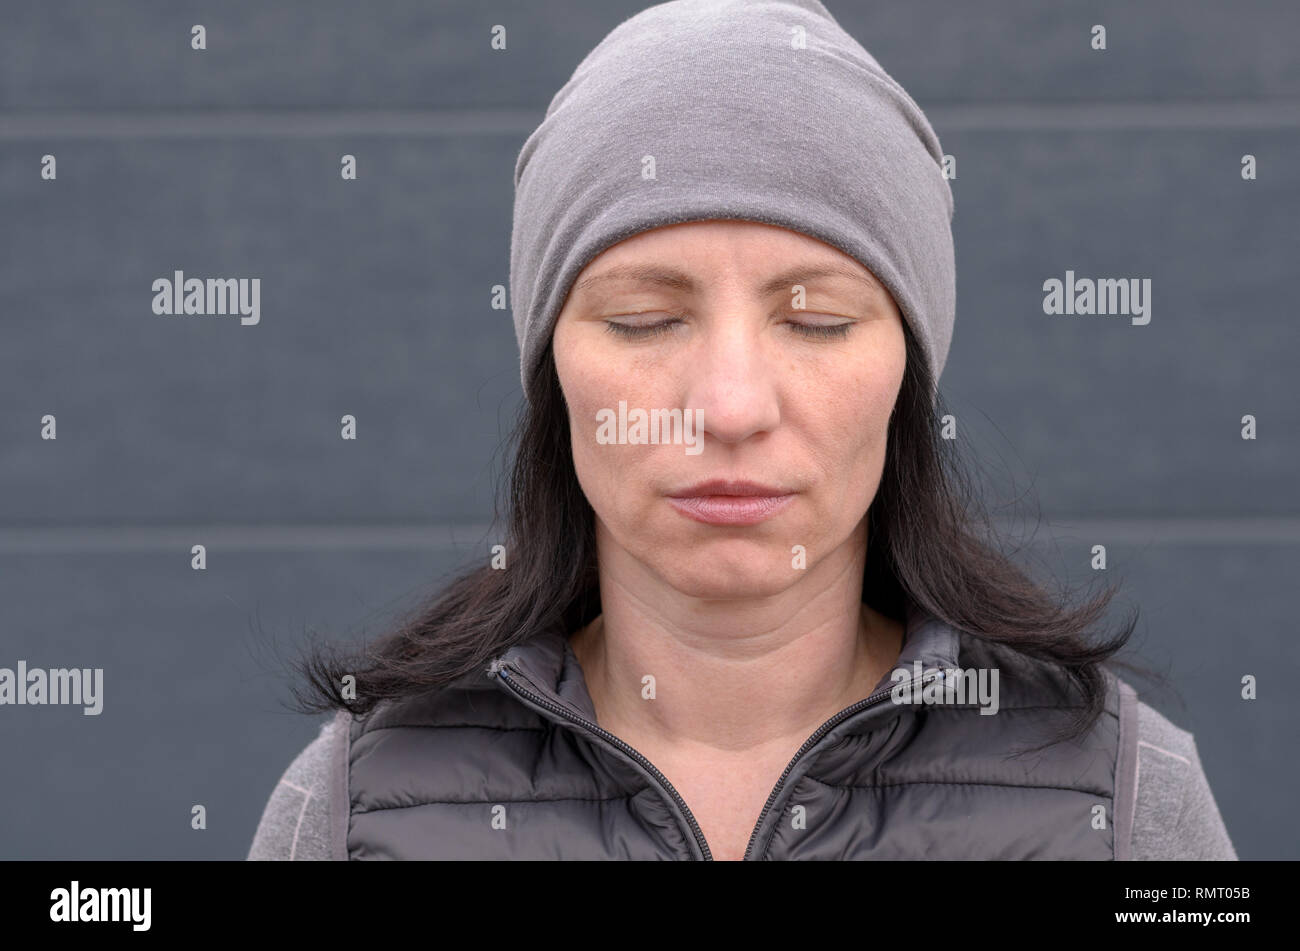 Portrait of Calm unemotional middle aged woman in gray beanie hat. Stock Photo